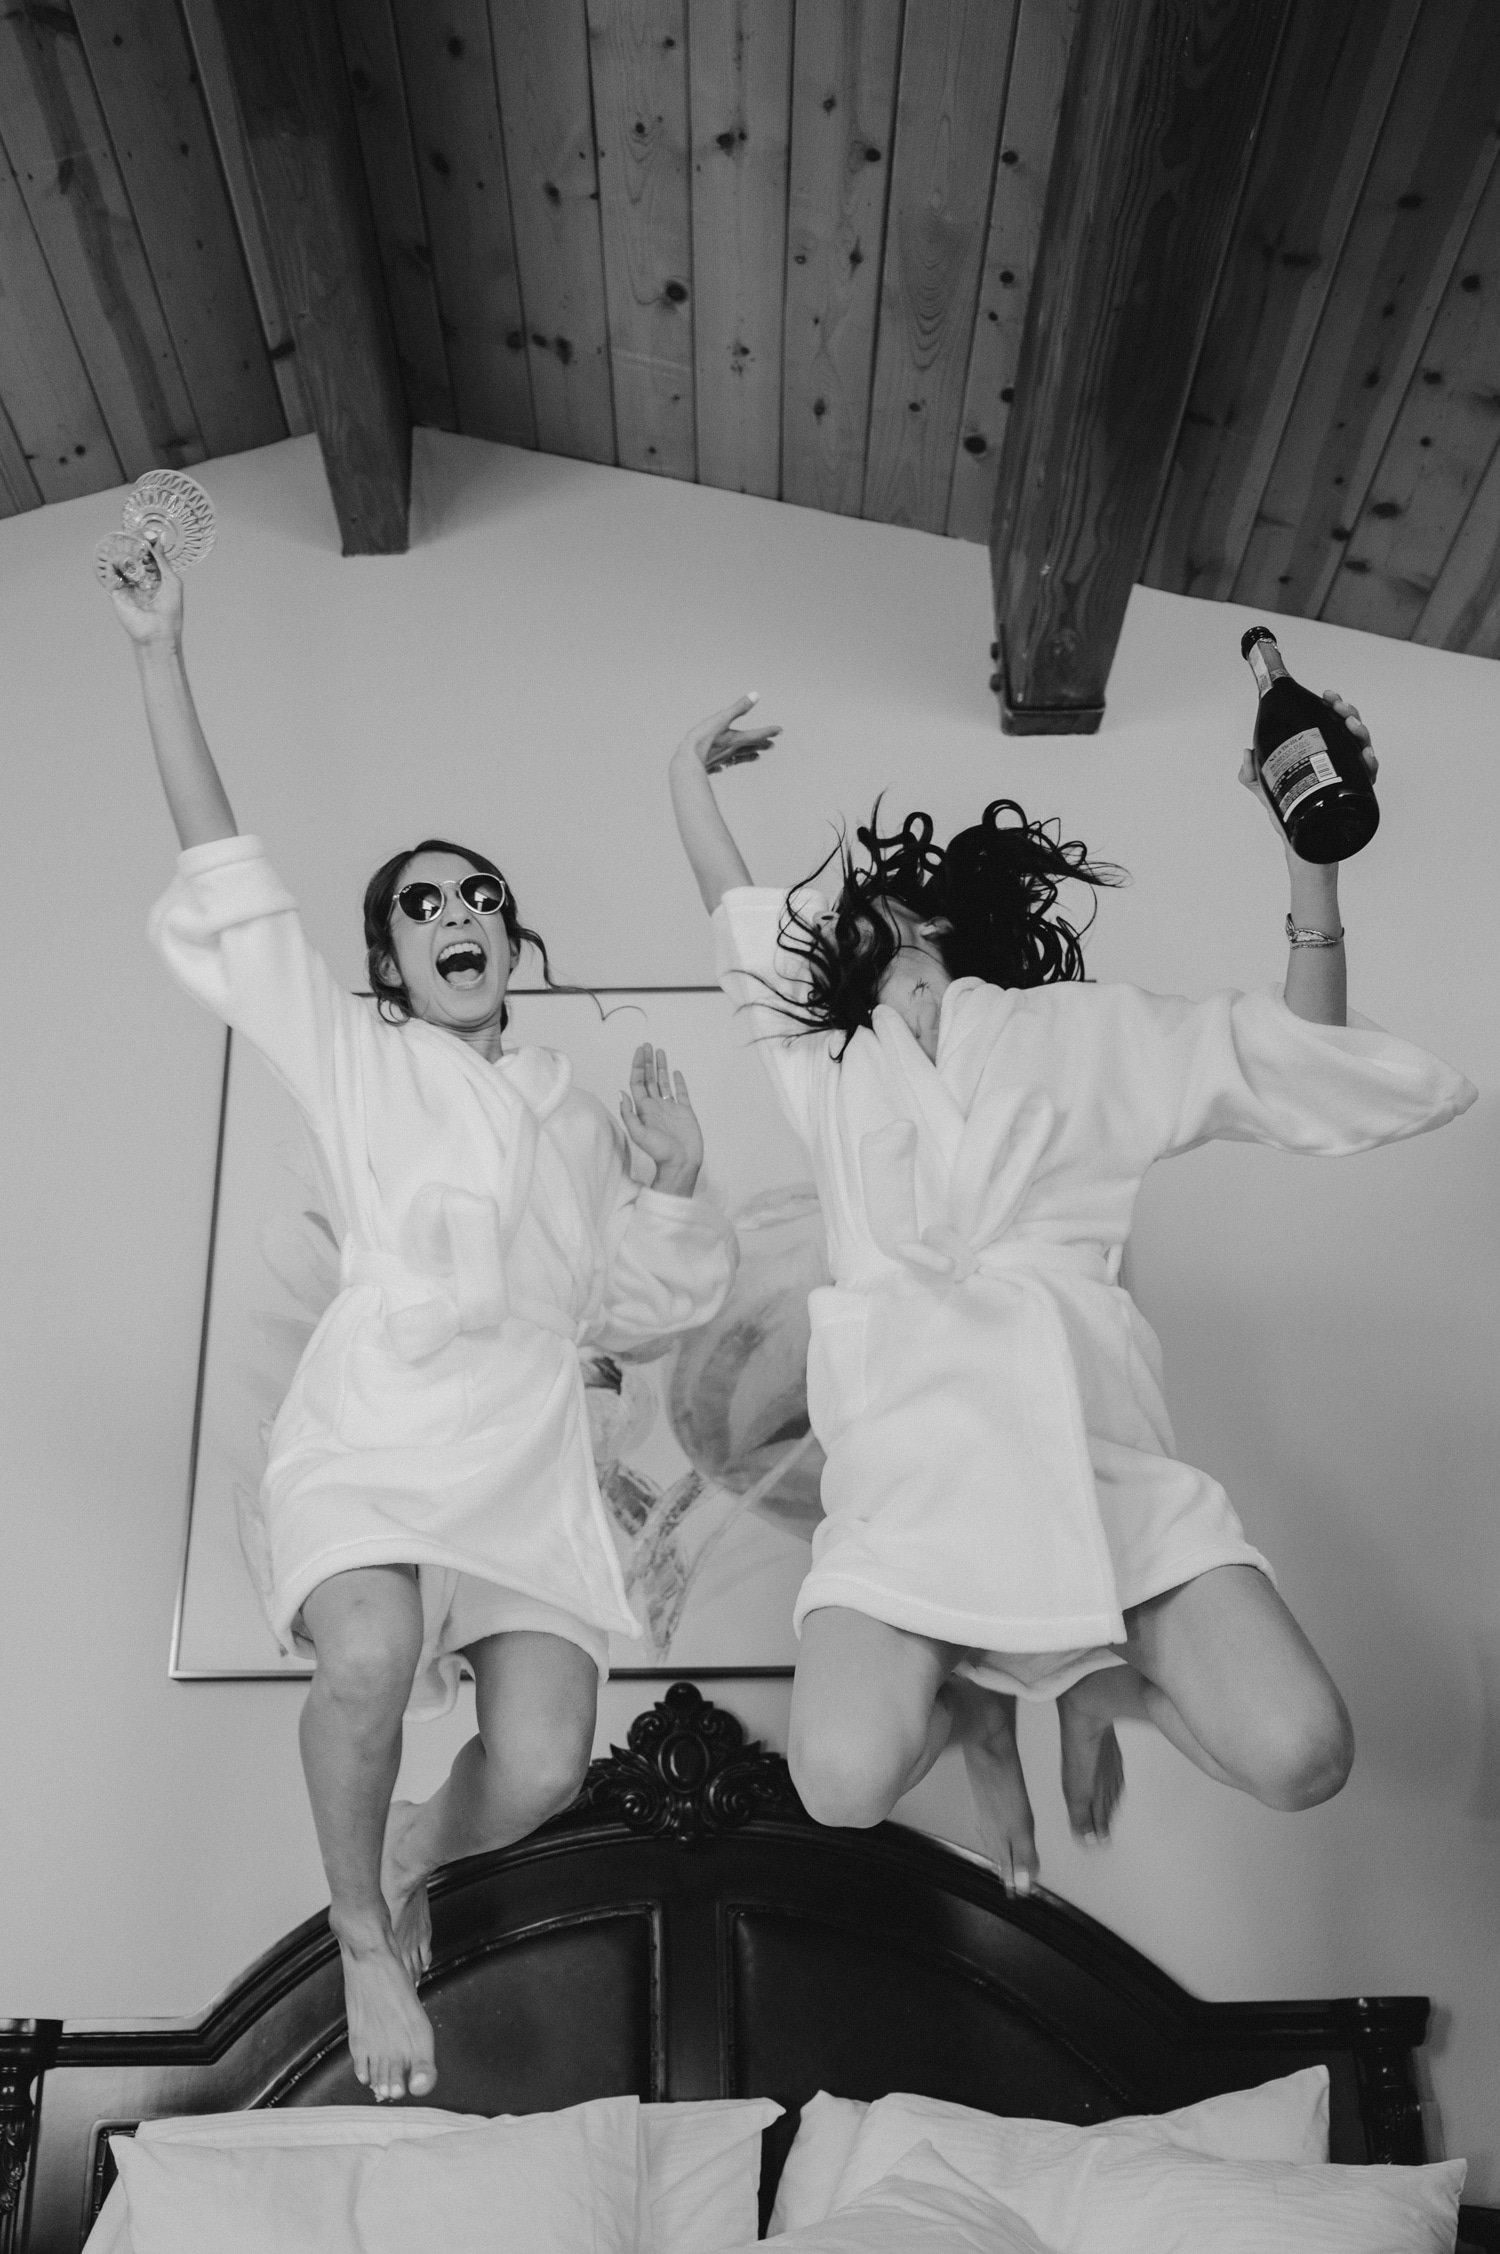 tahoe event center - lake tahoe wedding, photo of the bride and bridesmaid doing a jump shot during the morning preparation